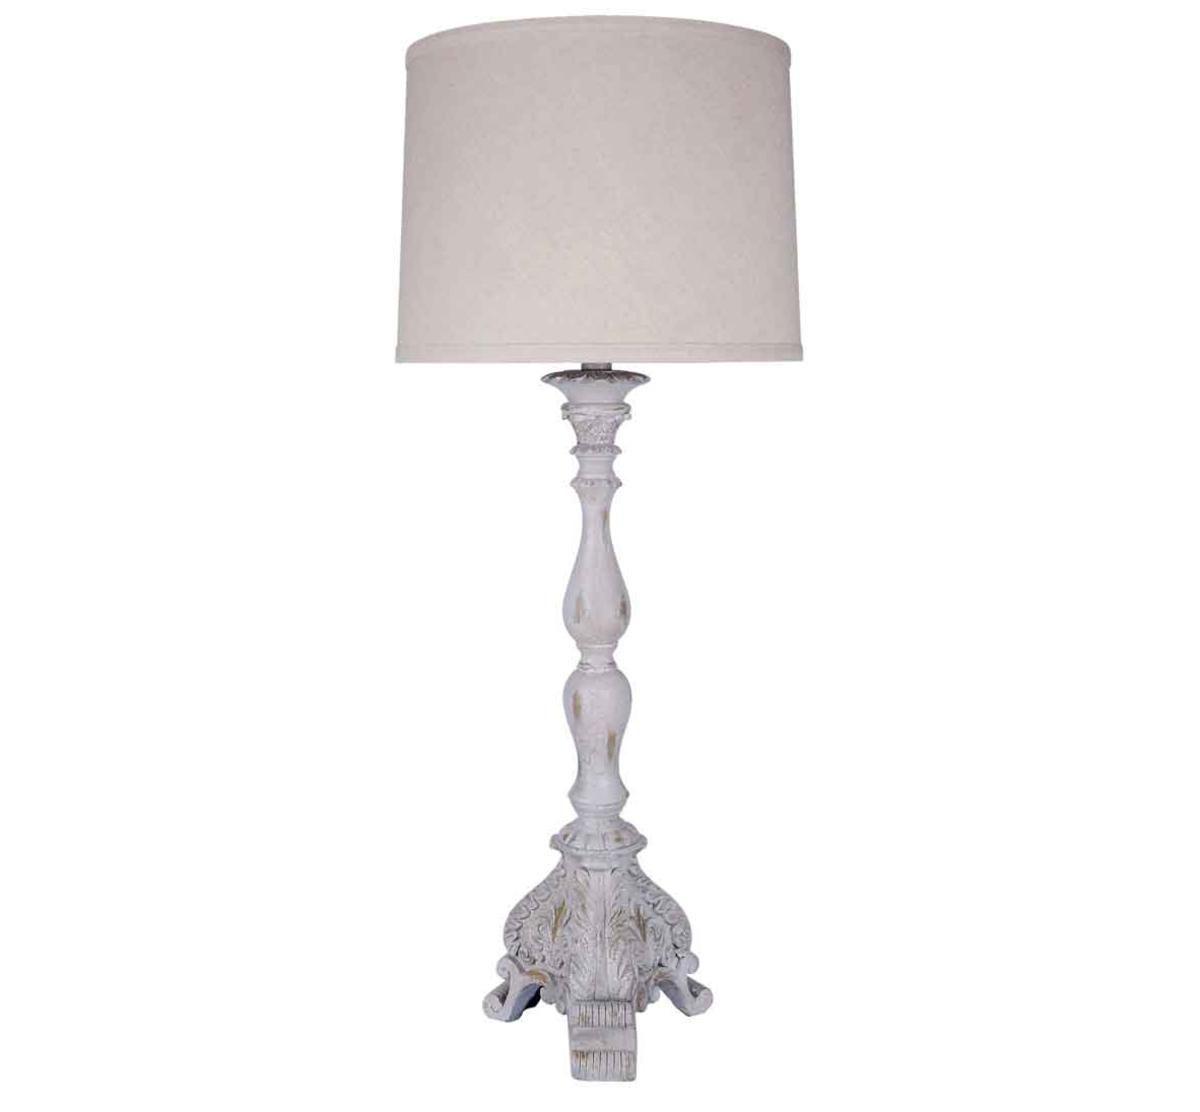 Lily Lamp Bad Home Furniture More, Lily Table Lamp Uk